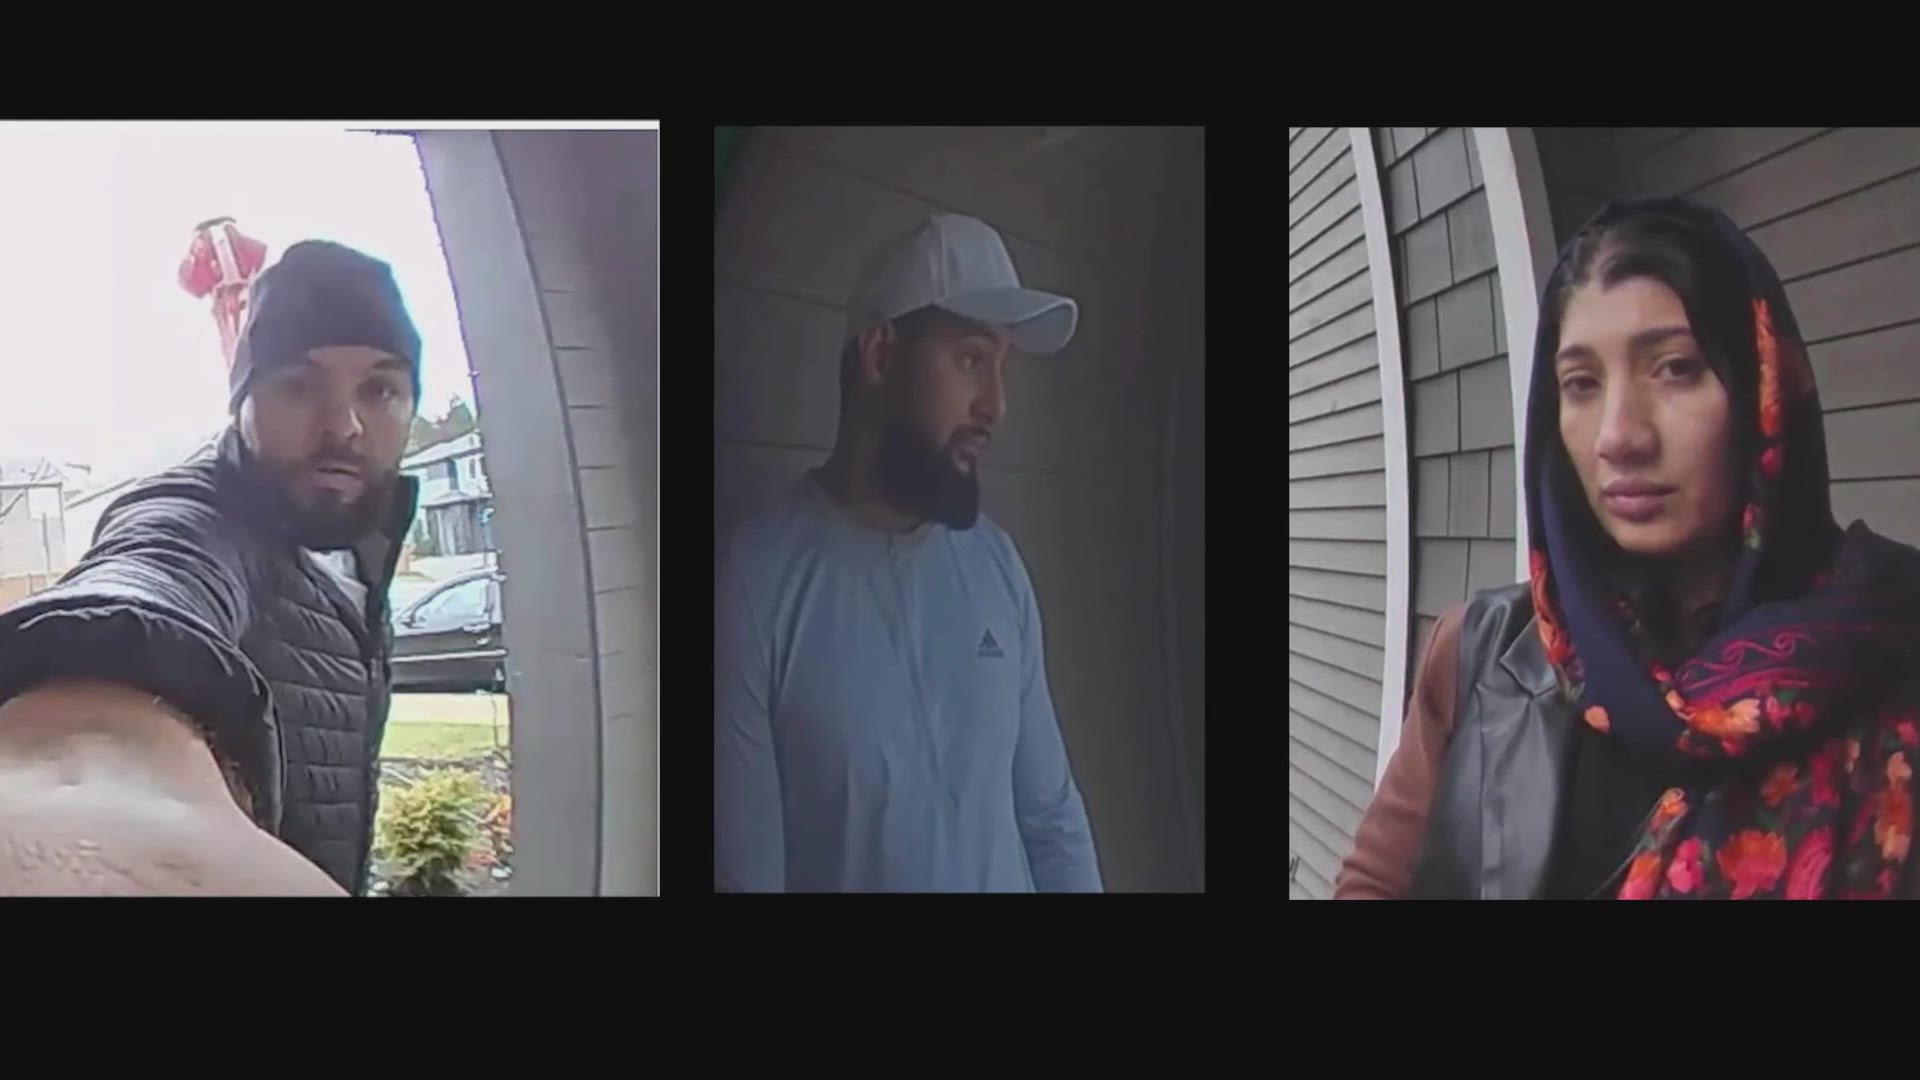 The burglaries have been happening during the daytime hours in Bothell along 35th Ave SE between 180th St SE and 228th St SE.